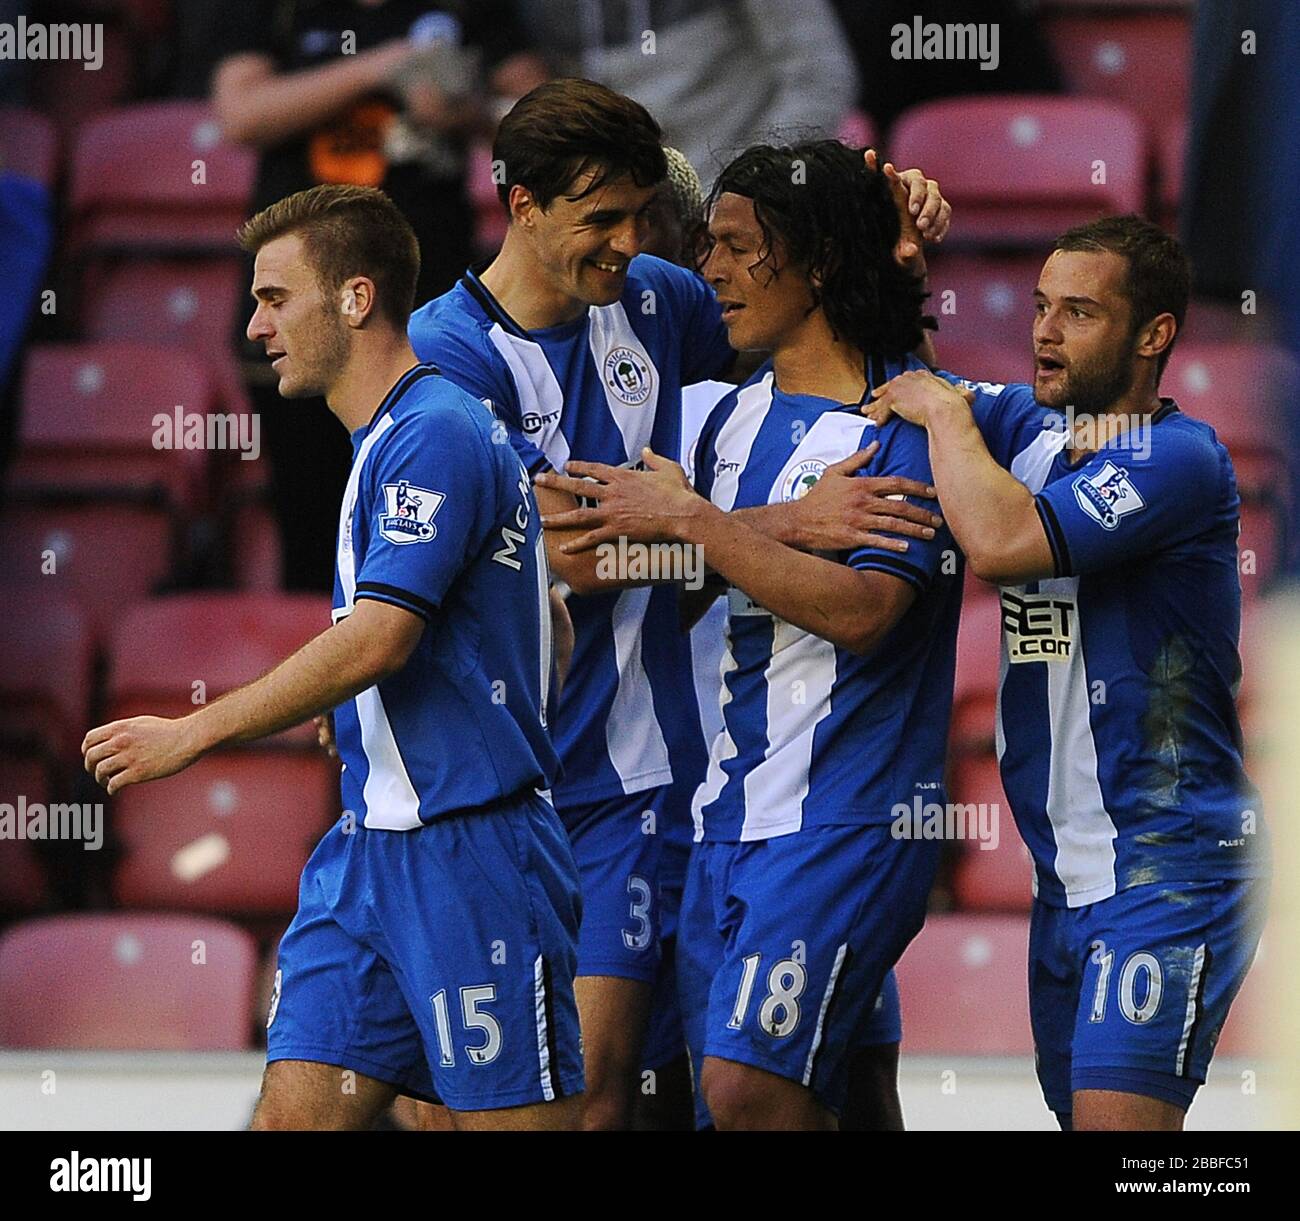 Wigan Athletic's Roger Espinoza (2nd right) is congratulated by team mates after scoring the opening goal against Swansea City. Stock Photo